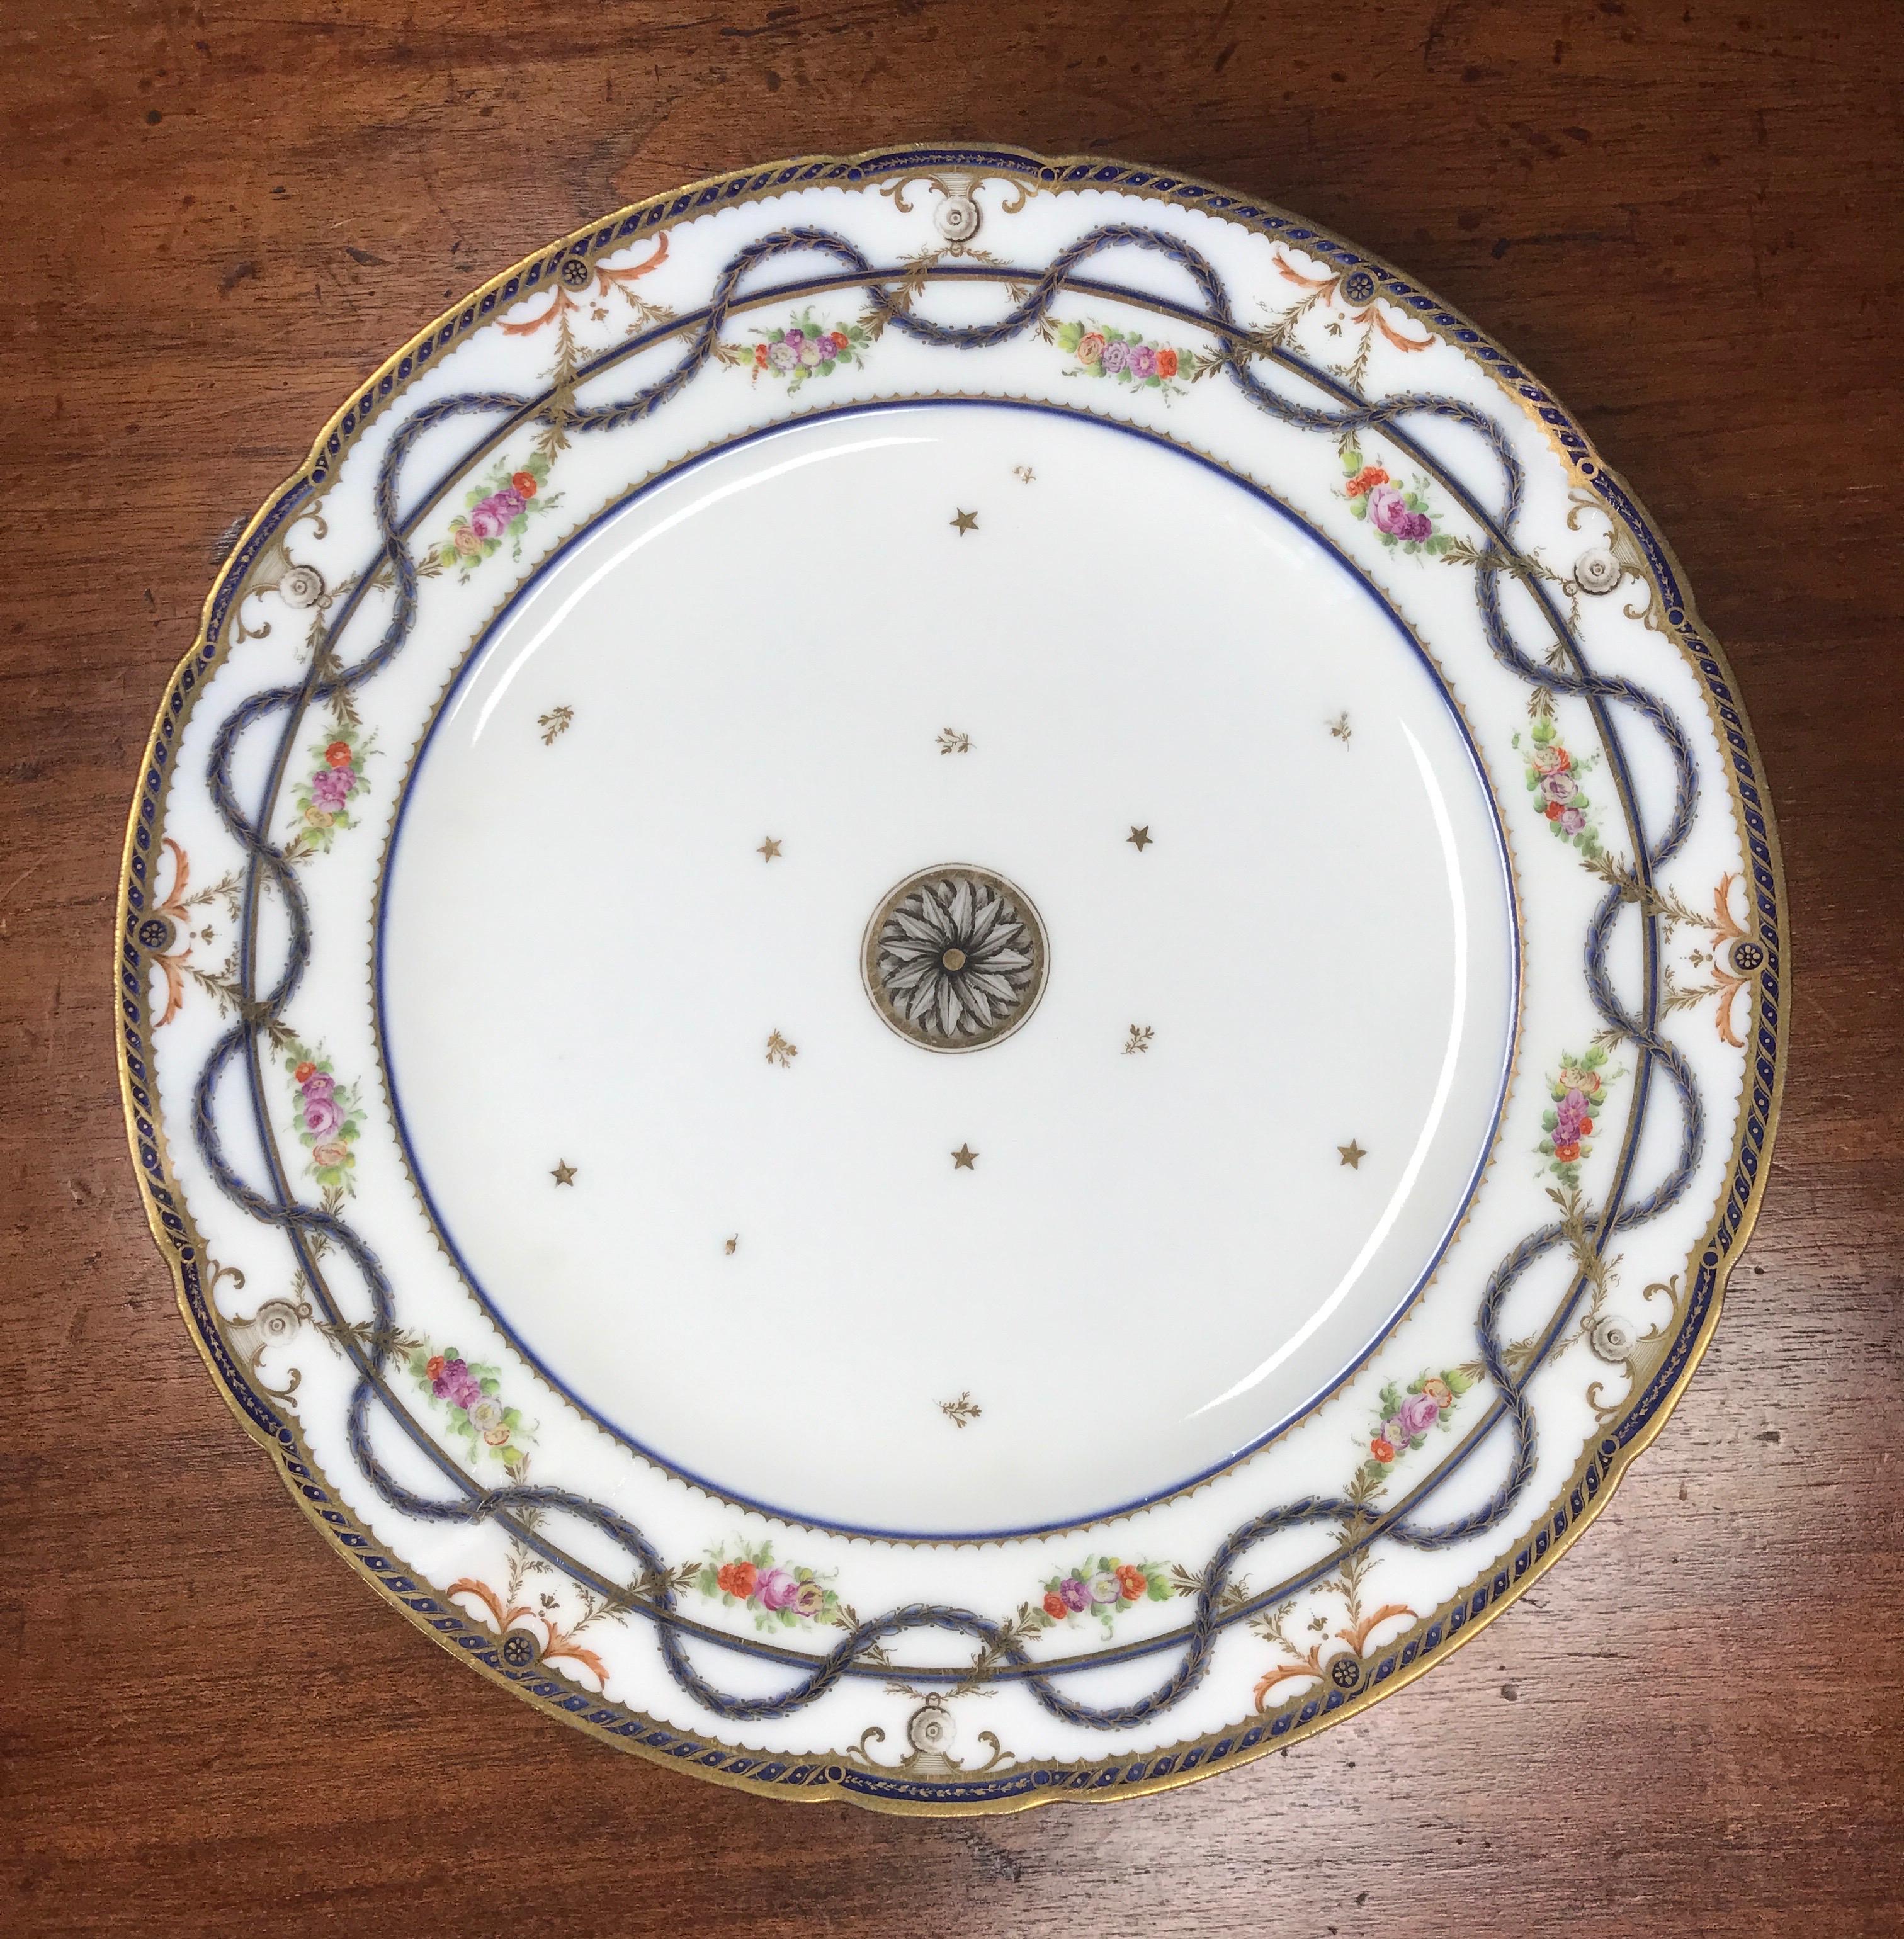 A handsome plate from Duc d'Angouleme's factory, decorated in the classical taste with gilt underglaze swags, rose garlands, scattered gilt stars and floral sprigs, surrounding the central monochrome rosette.

Duc d'Angouleme
Red stencil